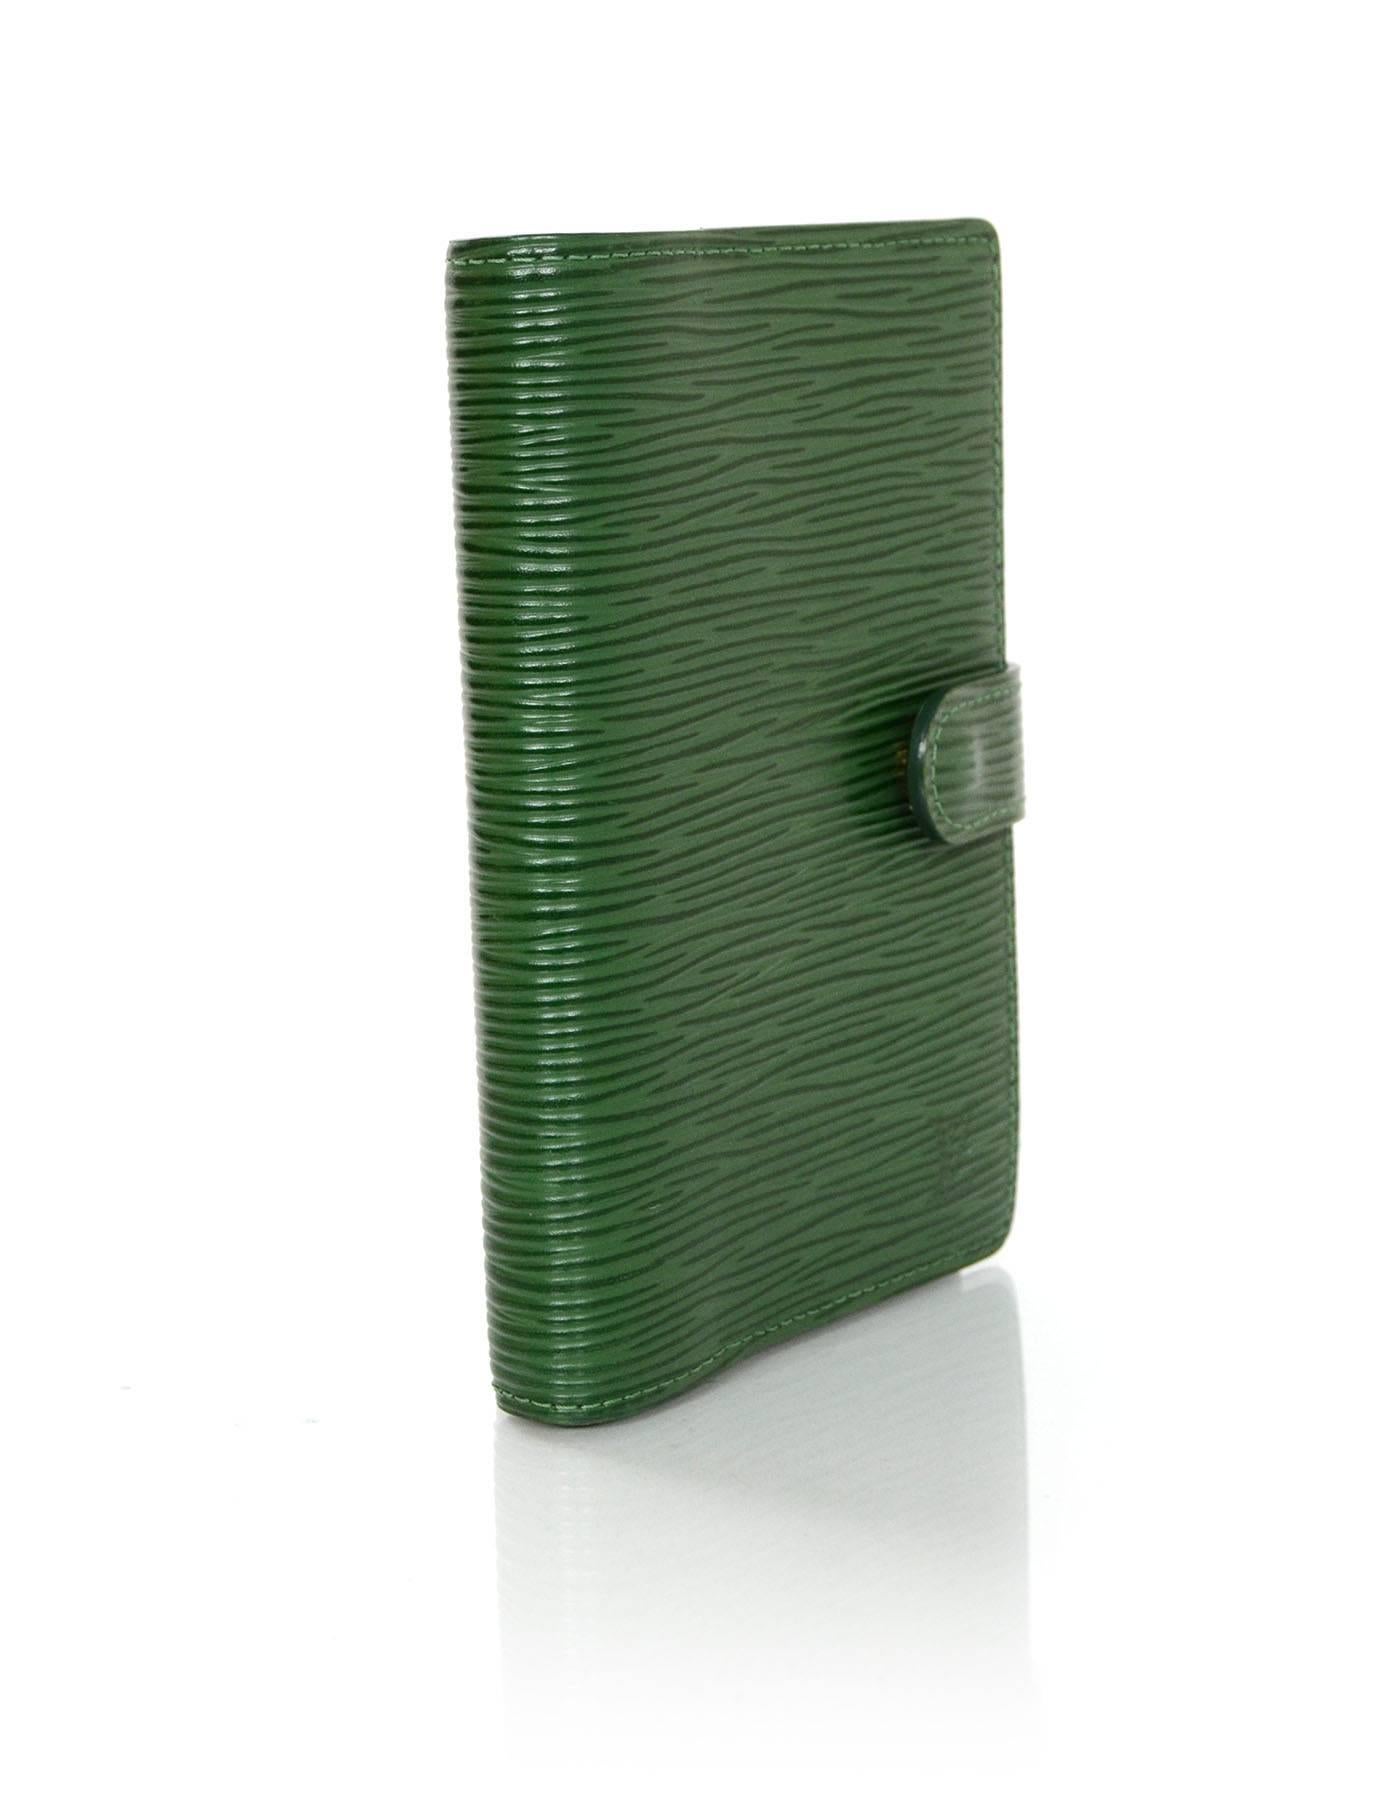 Louis Vuitton Green Epi Leather Agenda

Made In: Spain
Color: Green
Materials: Epi leather and metal
Lining: Green coated canvas
Closure/opening: Snap closure
Exterior Pockets: None
Interior Pockets: Two slot compartments and three card